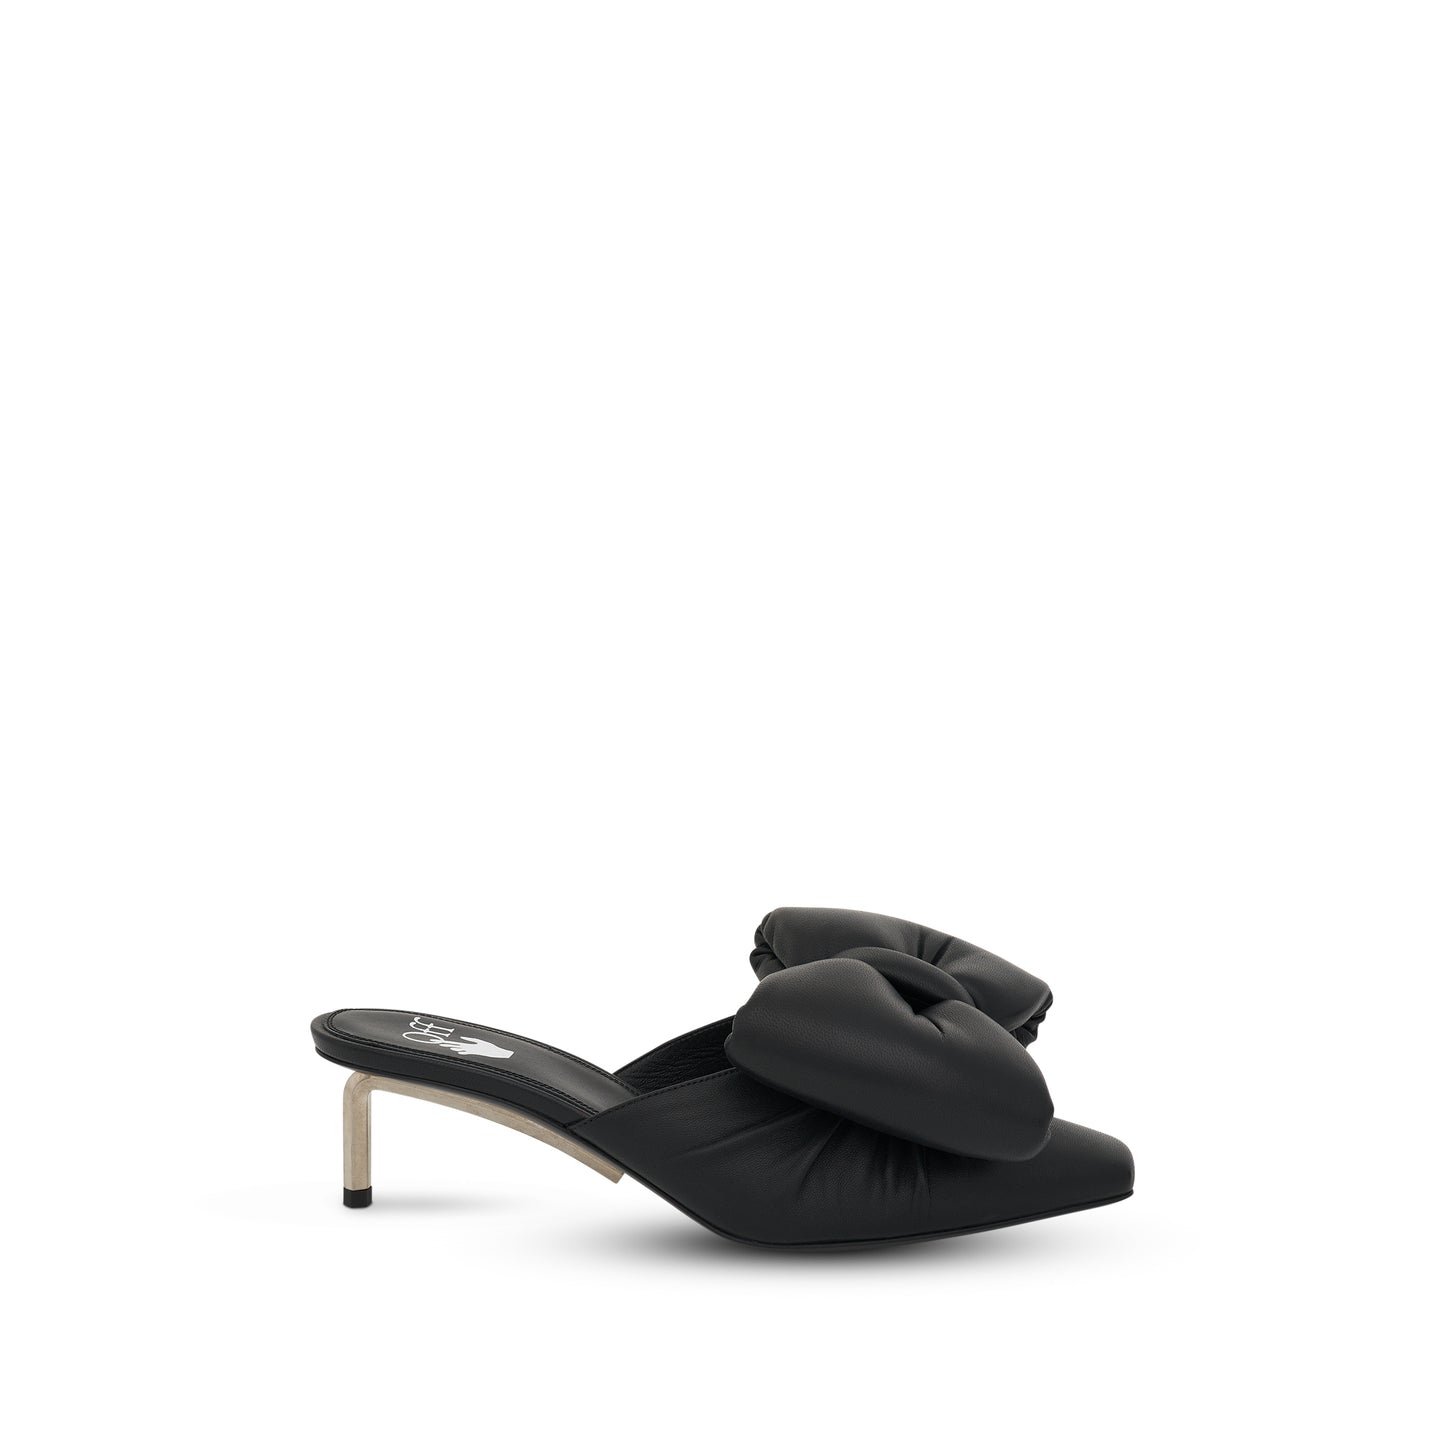 Nappa Bow Allen Sabot Shoes in Black